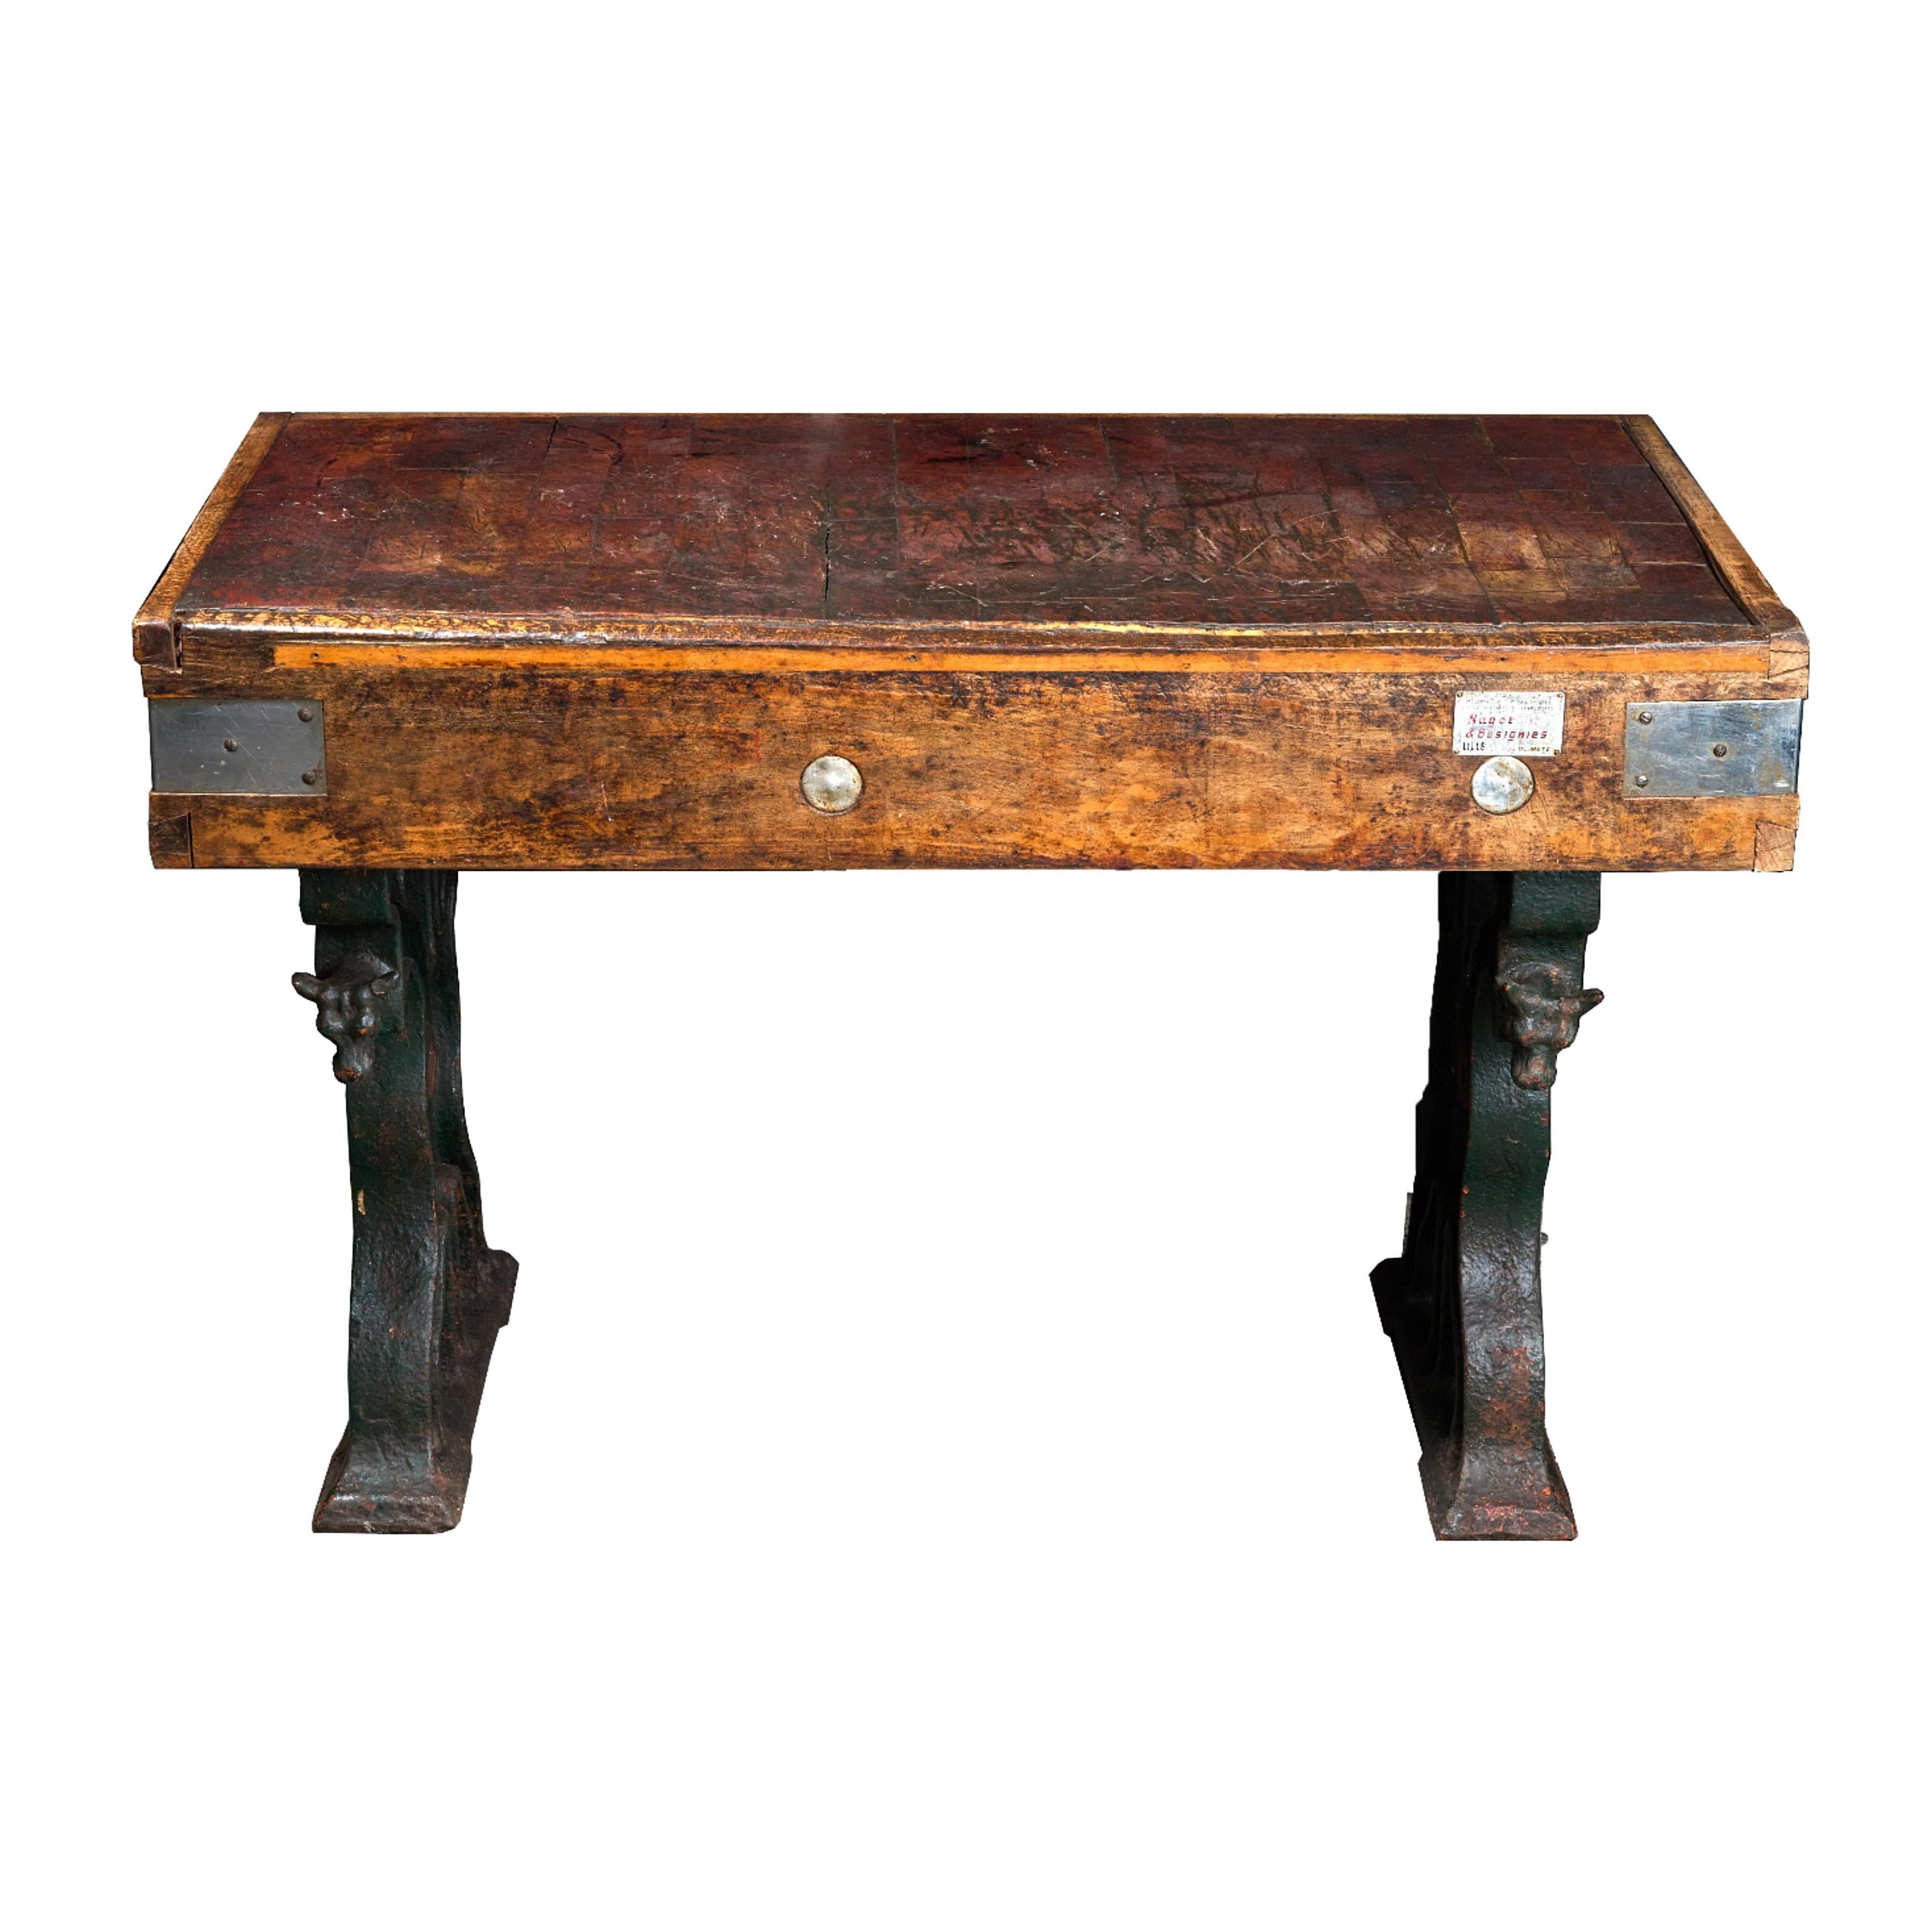 Early 20th Century Butcher Block Table with Cast Iron Cow Head Legs